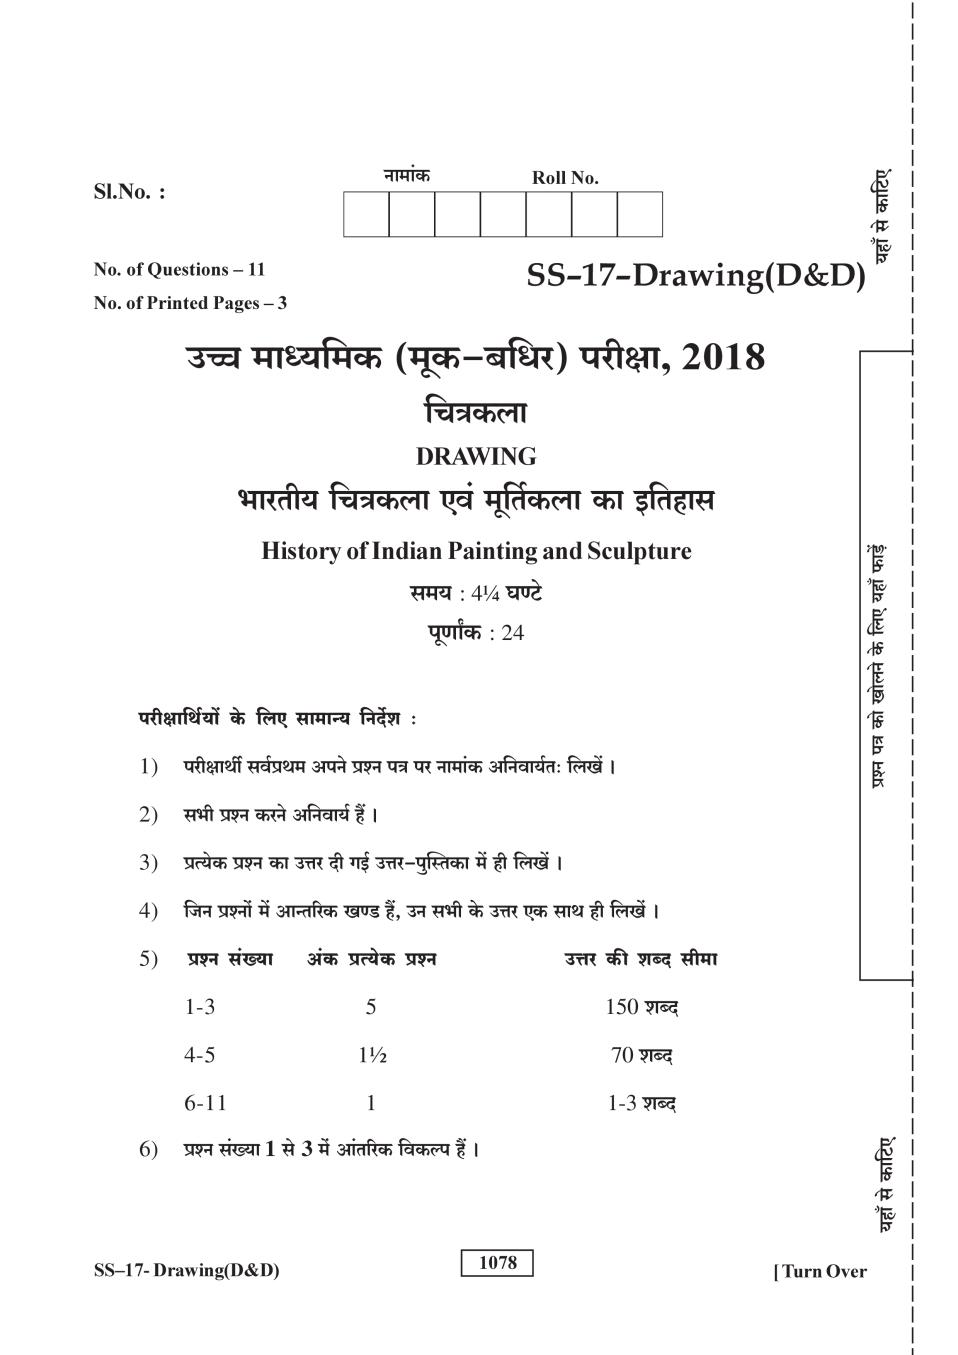 Rajasthan Board 12th Class Drawing (D&D) Question Paper 2018 - Page 1